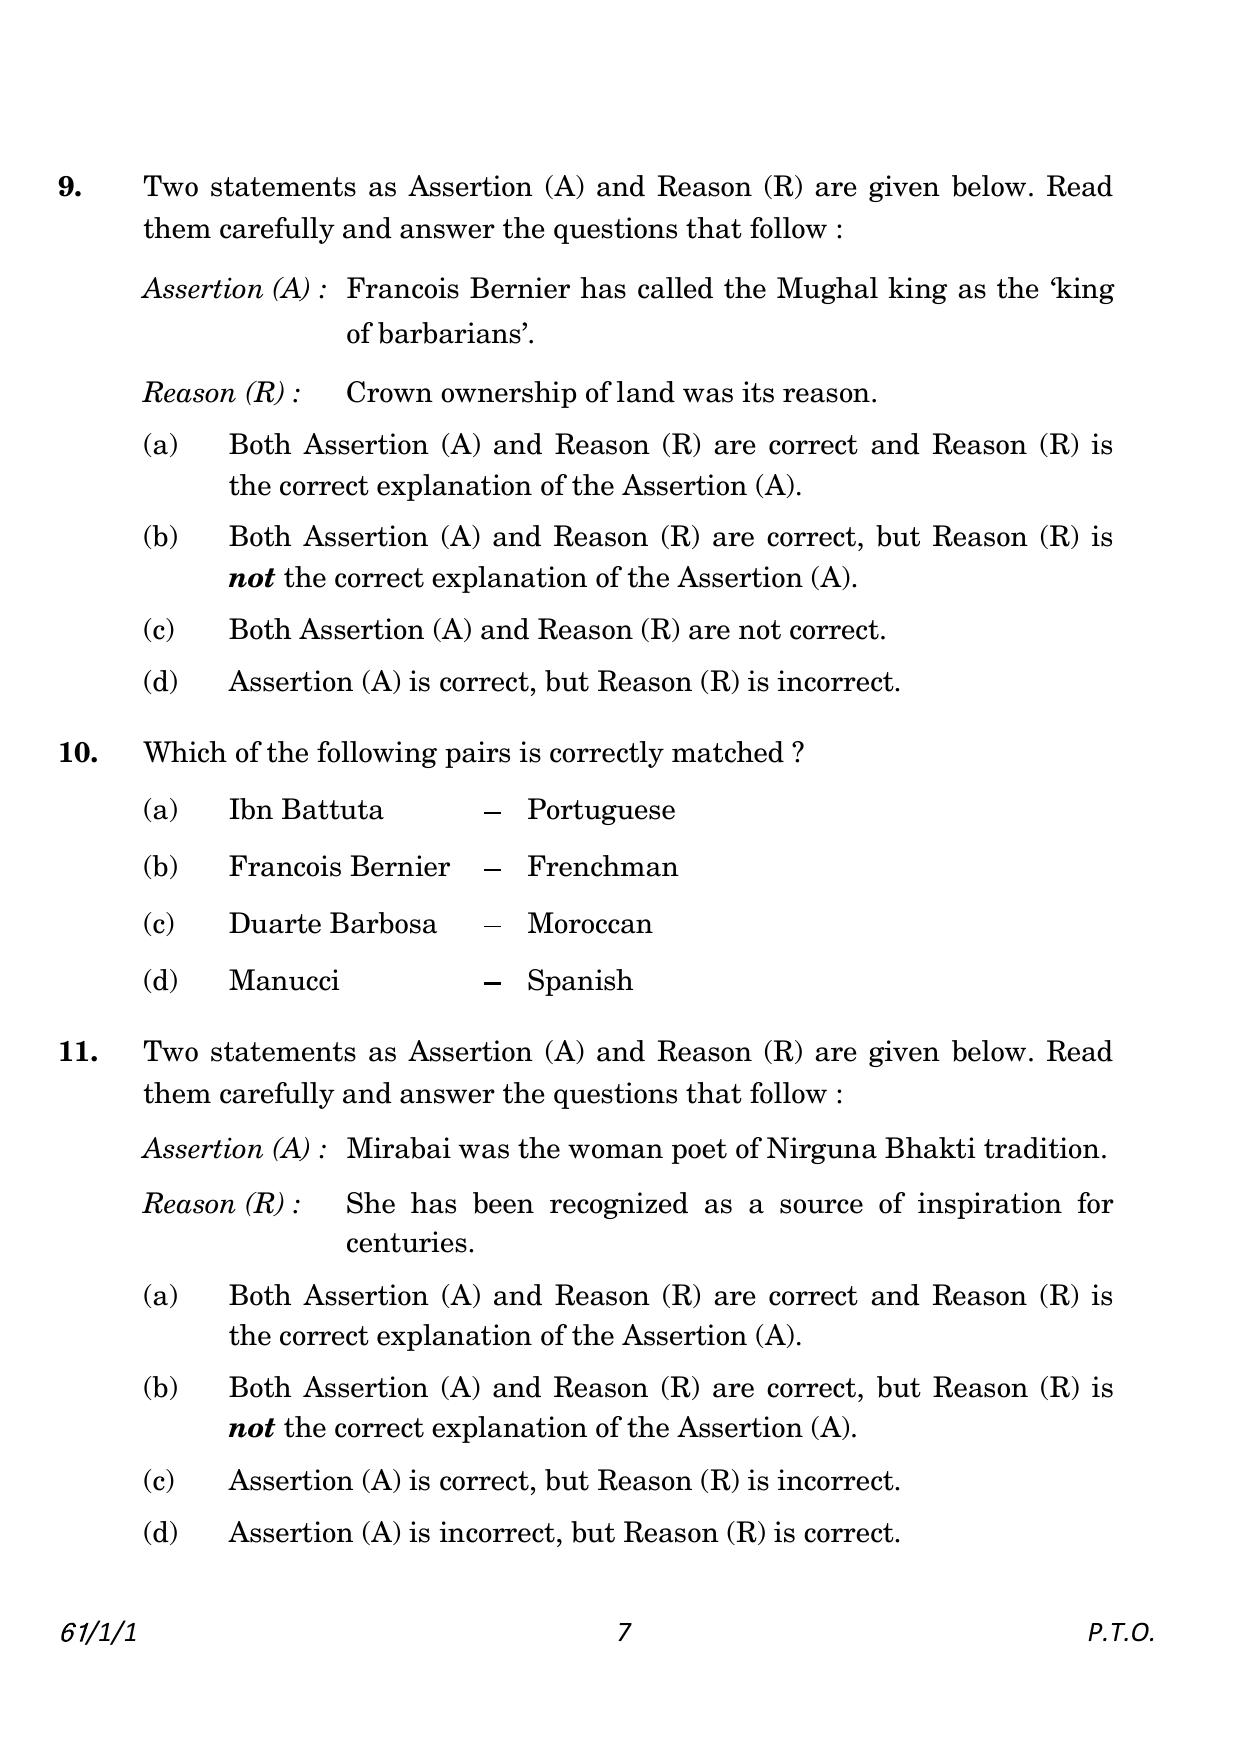 CBSE Class 12 61-1-1 History 2023 Question Paper - Page 7